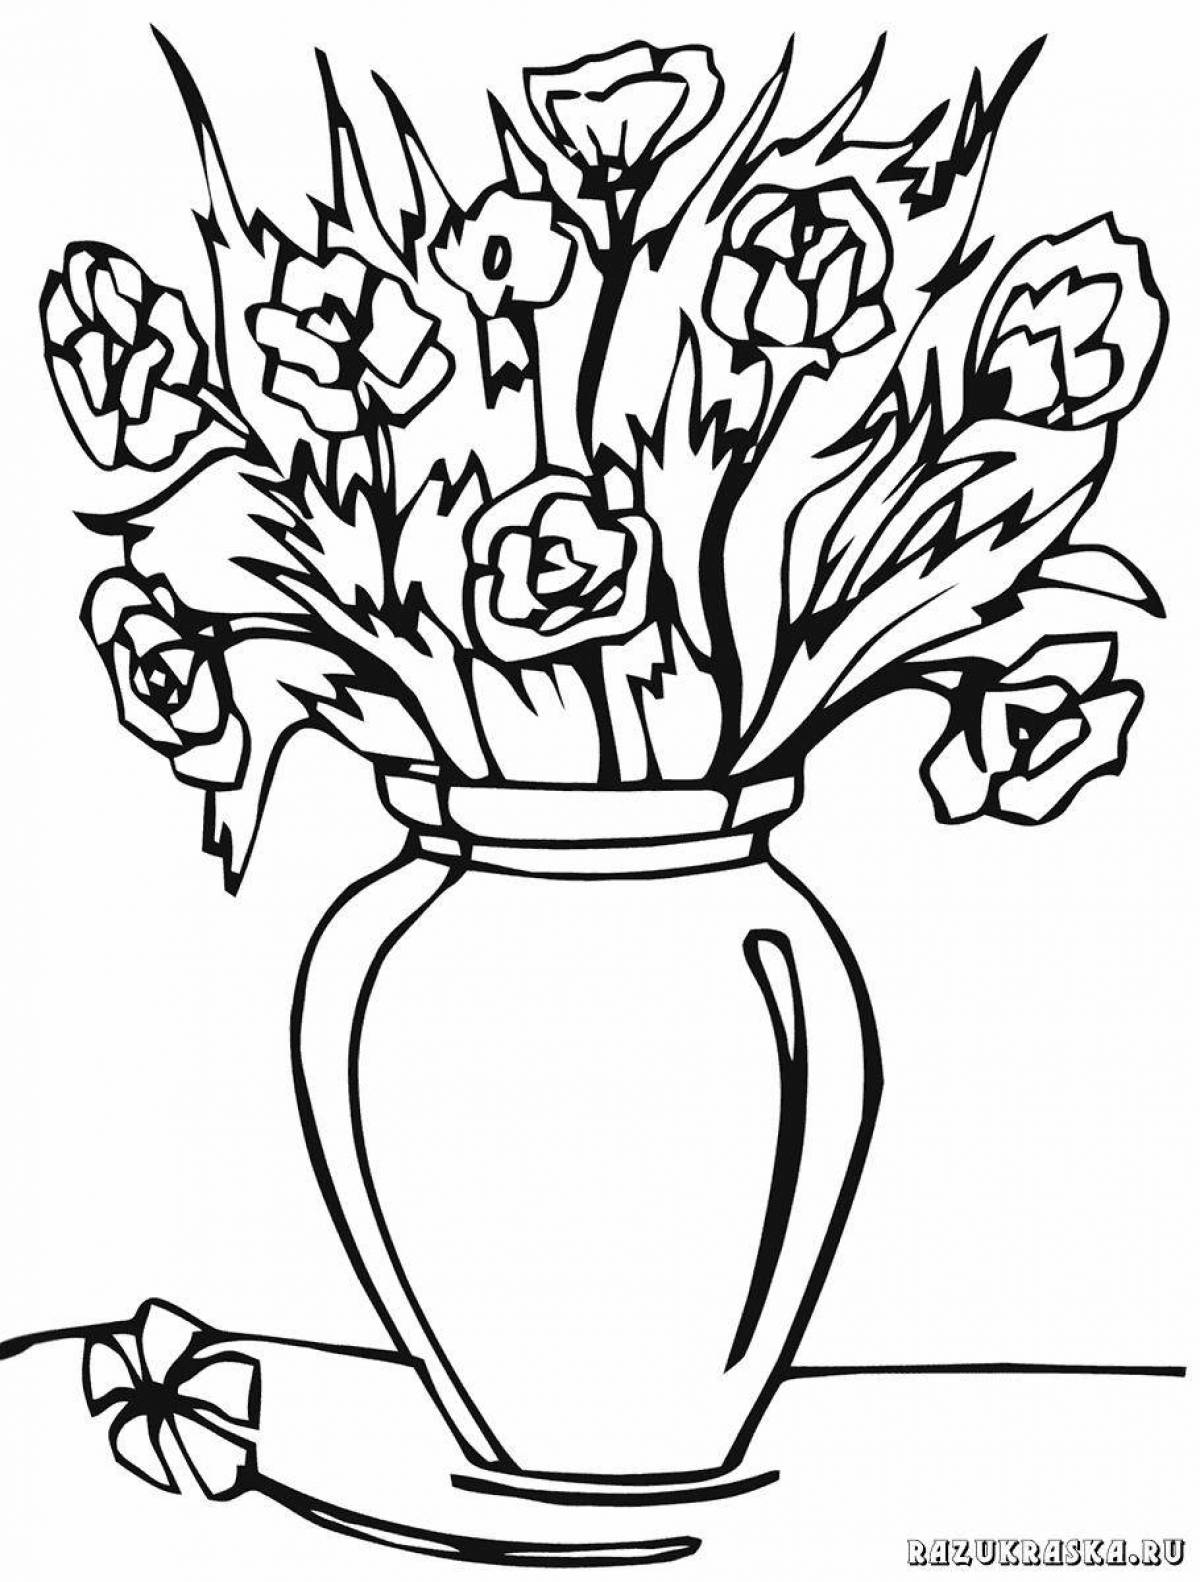 Coloring book shining vase with flowers for children 5-6 years old